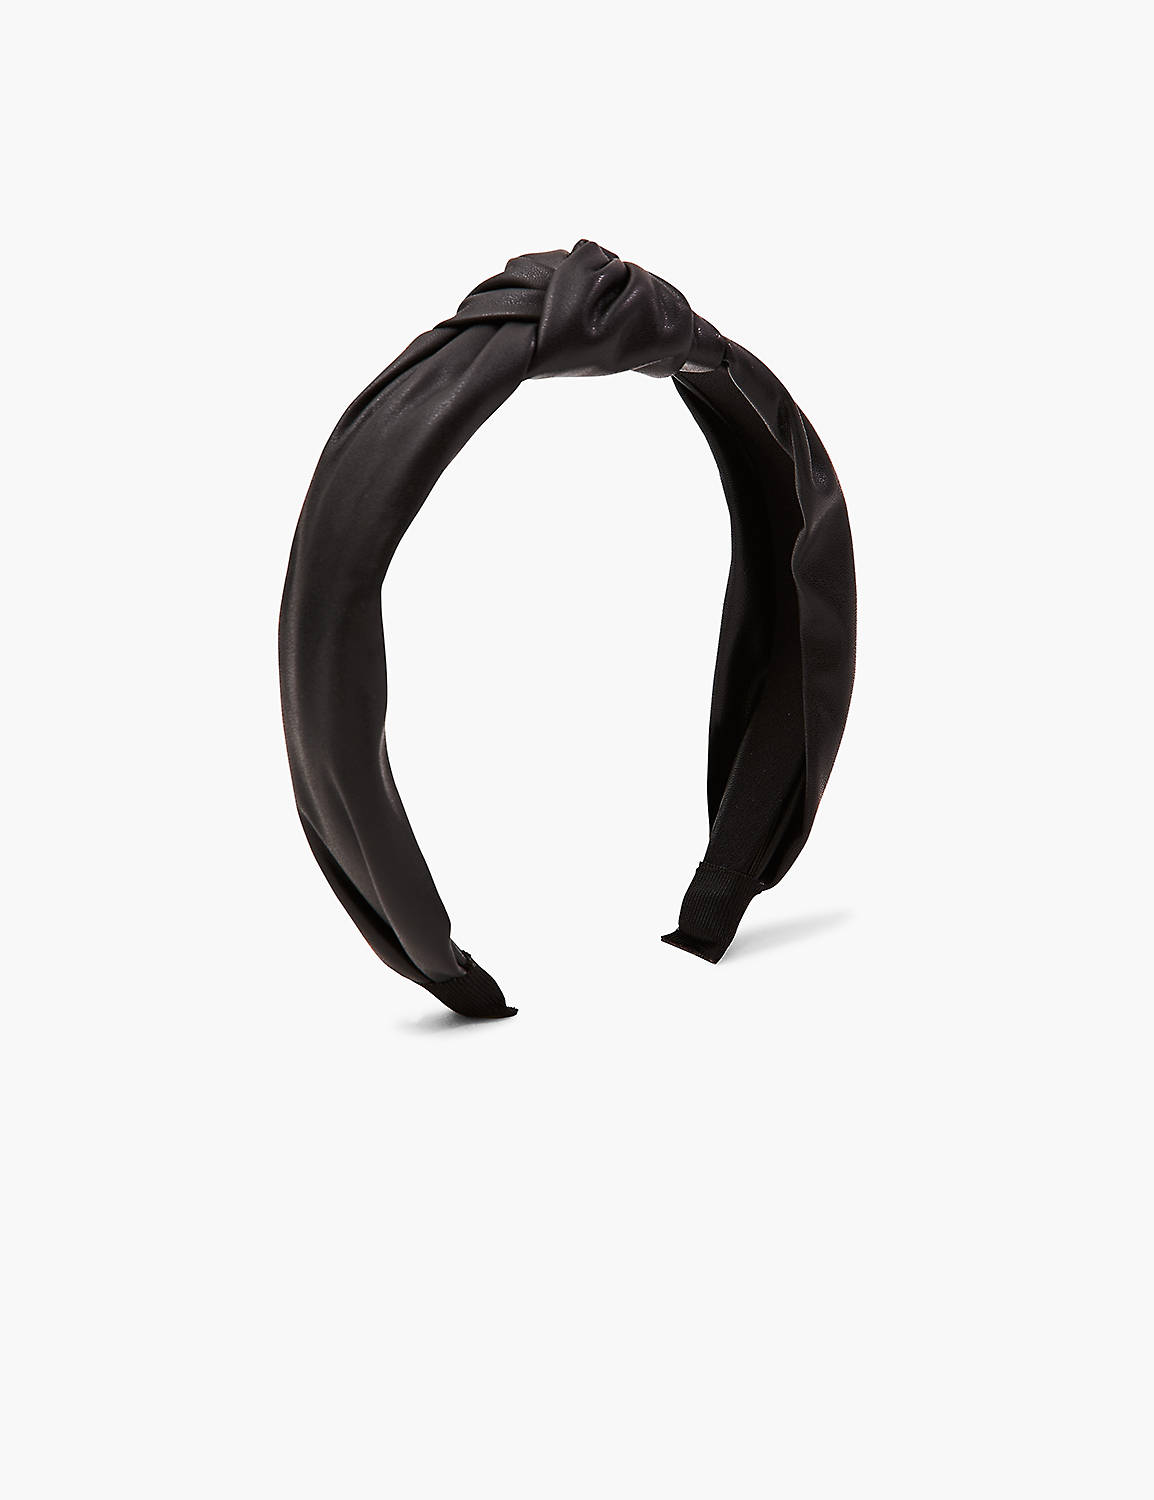 FAUX LEATHER KNOT HEADBAND Product Image 1